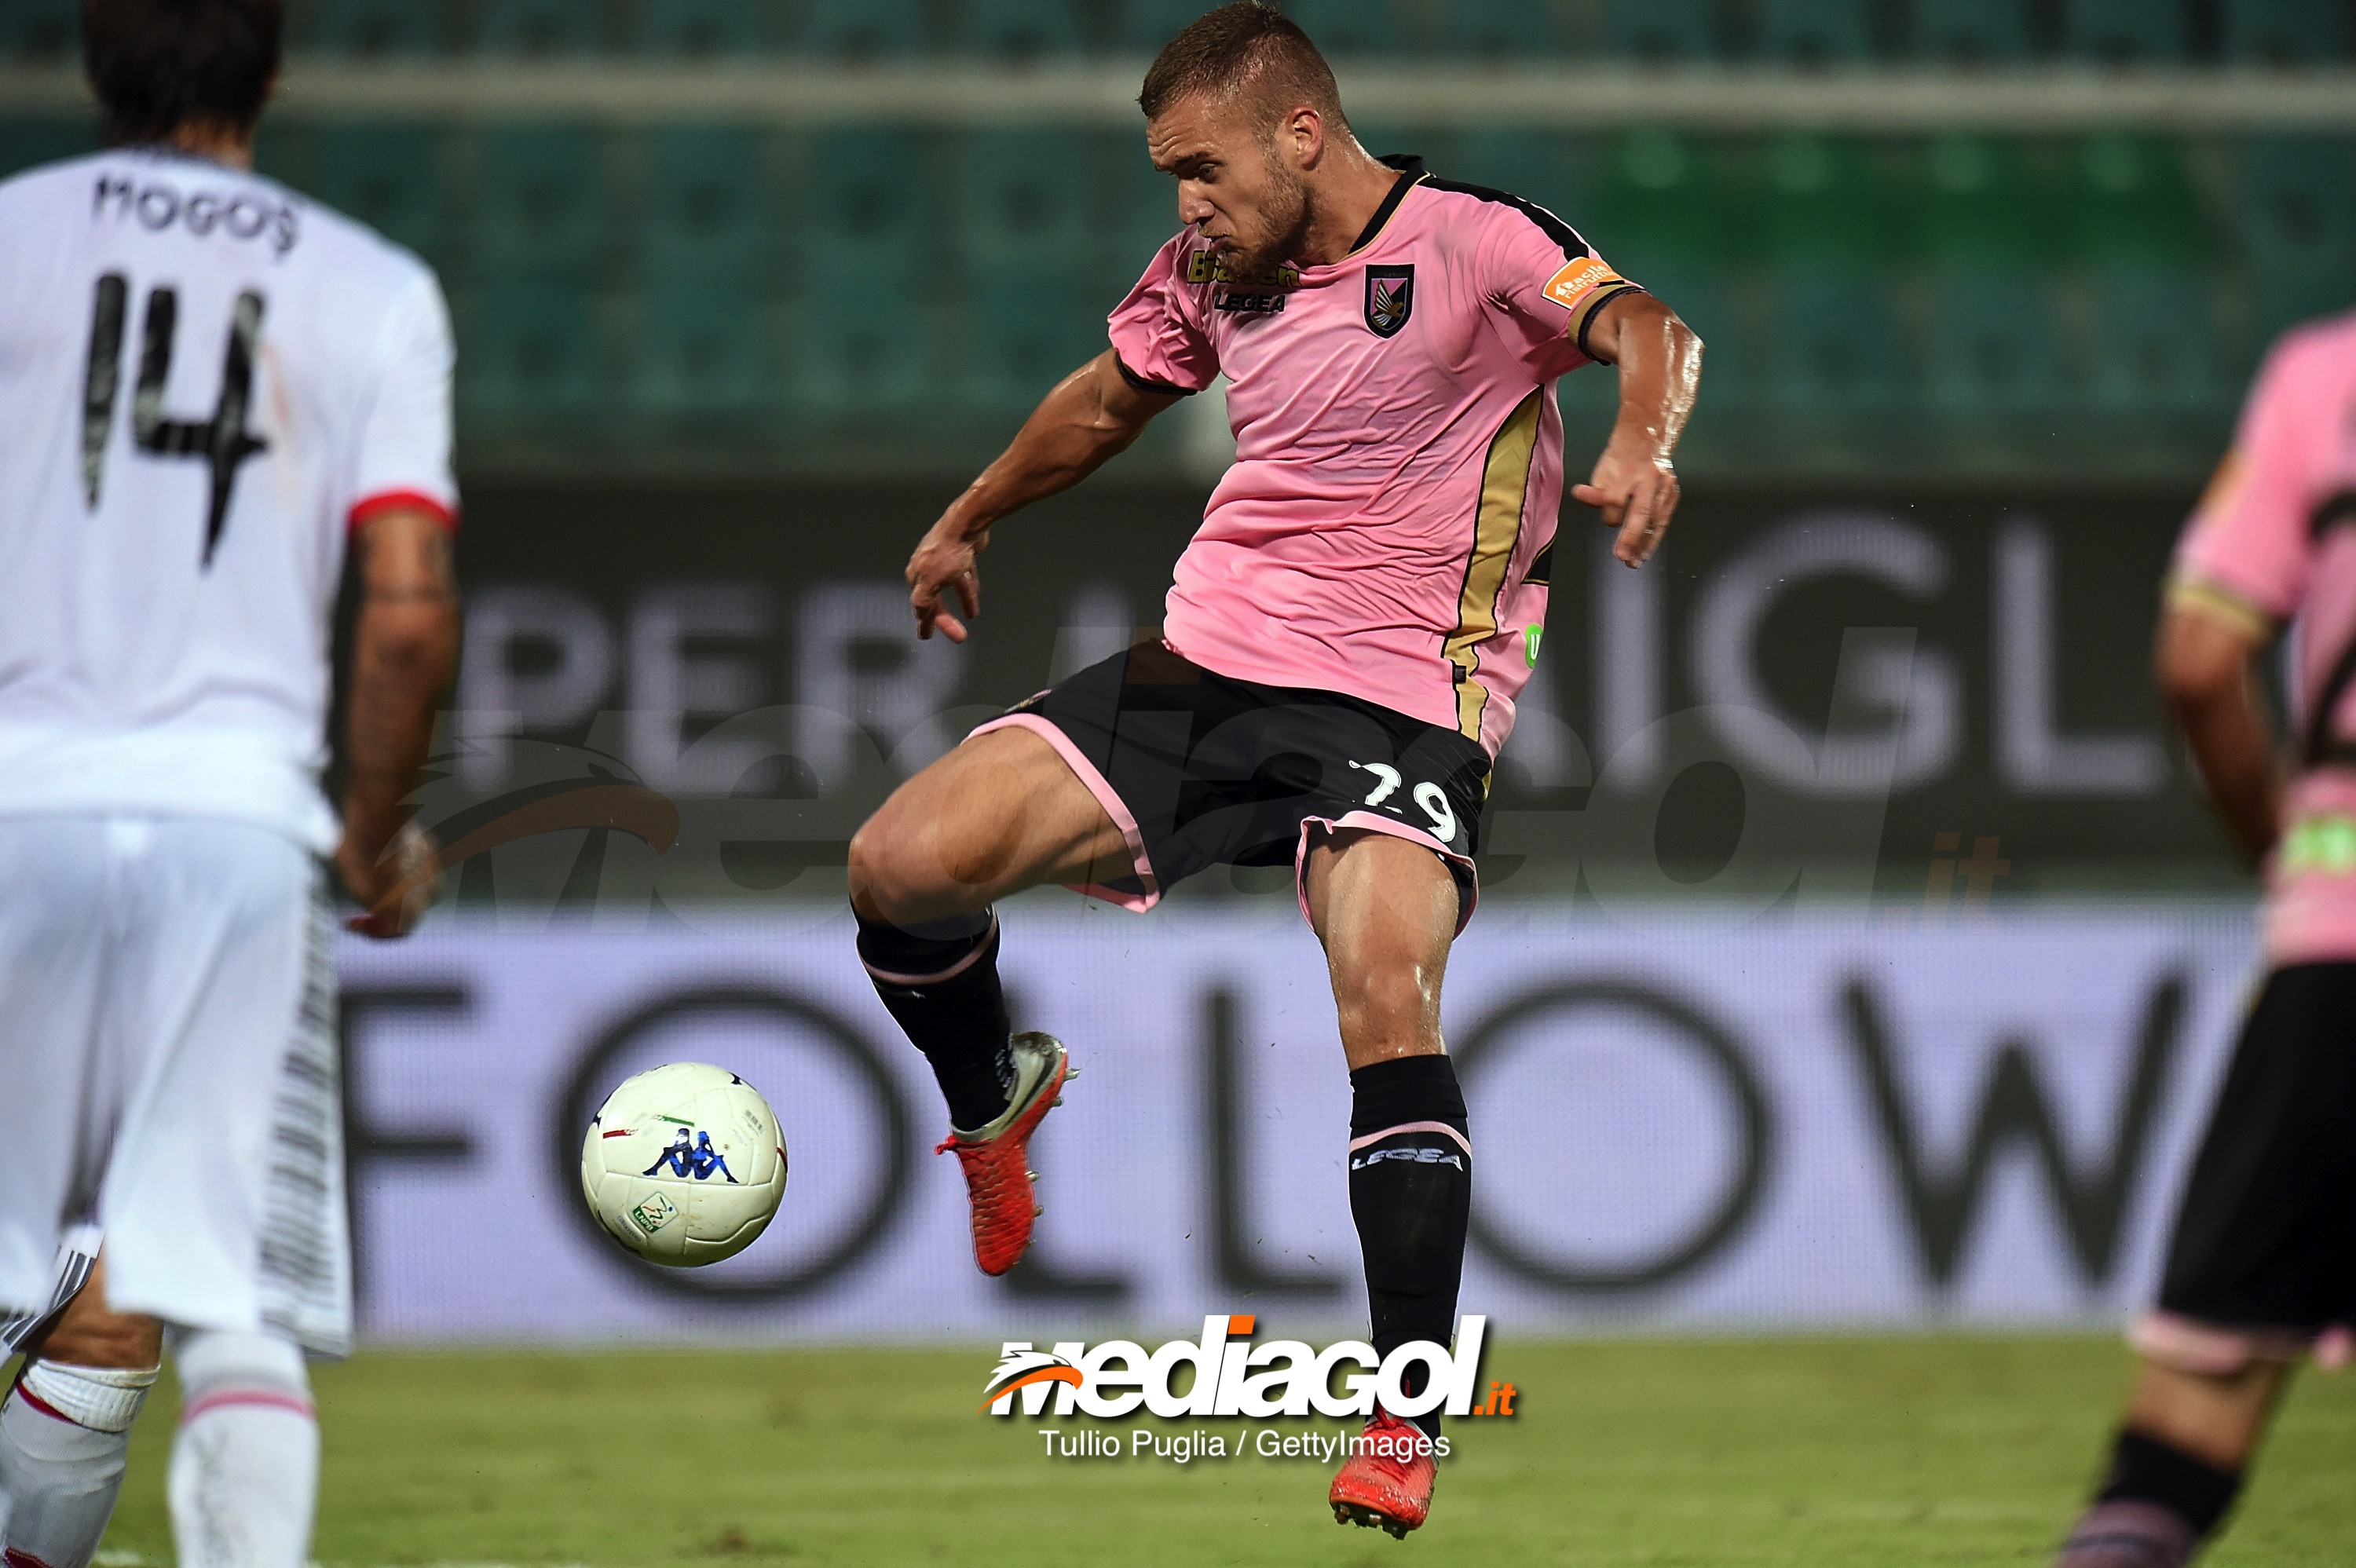 PALERMO, ITALY - AUGUST 31:  George Puscas of Palermo kicks the ball during the Serie B match between US Citta' di Palermo and US Cremonese at Stadio Renzo Barbera on August 31, 2018 in Palermo, Italy.  (Photo by Tullio M. Puglia/Getty Images)